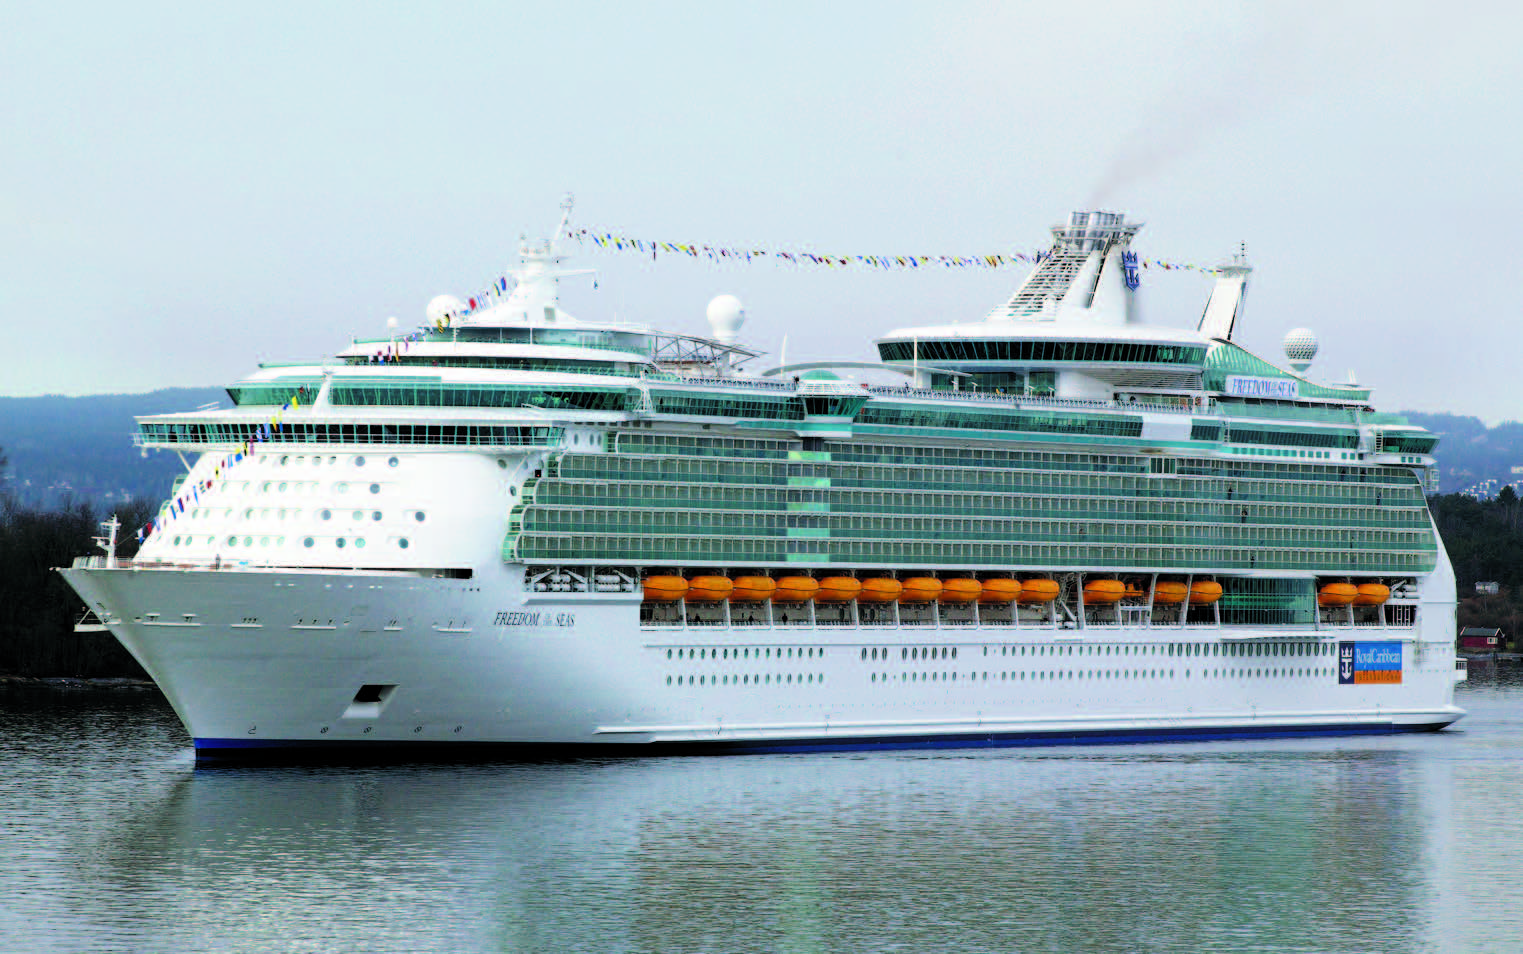 Cruise liner, cruise vessel